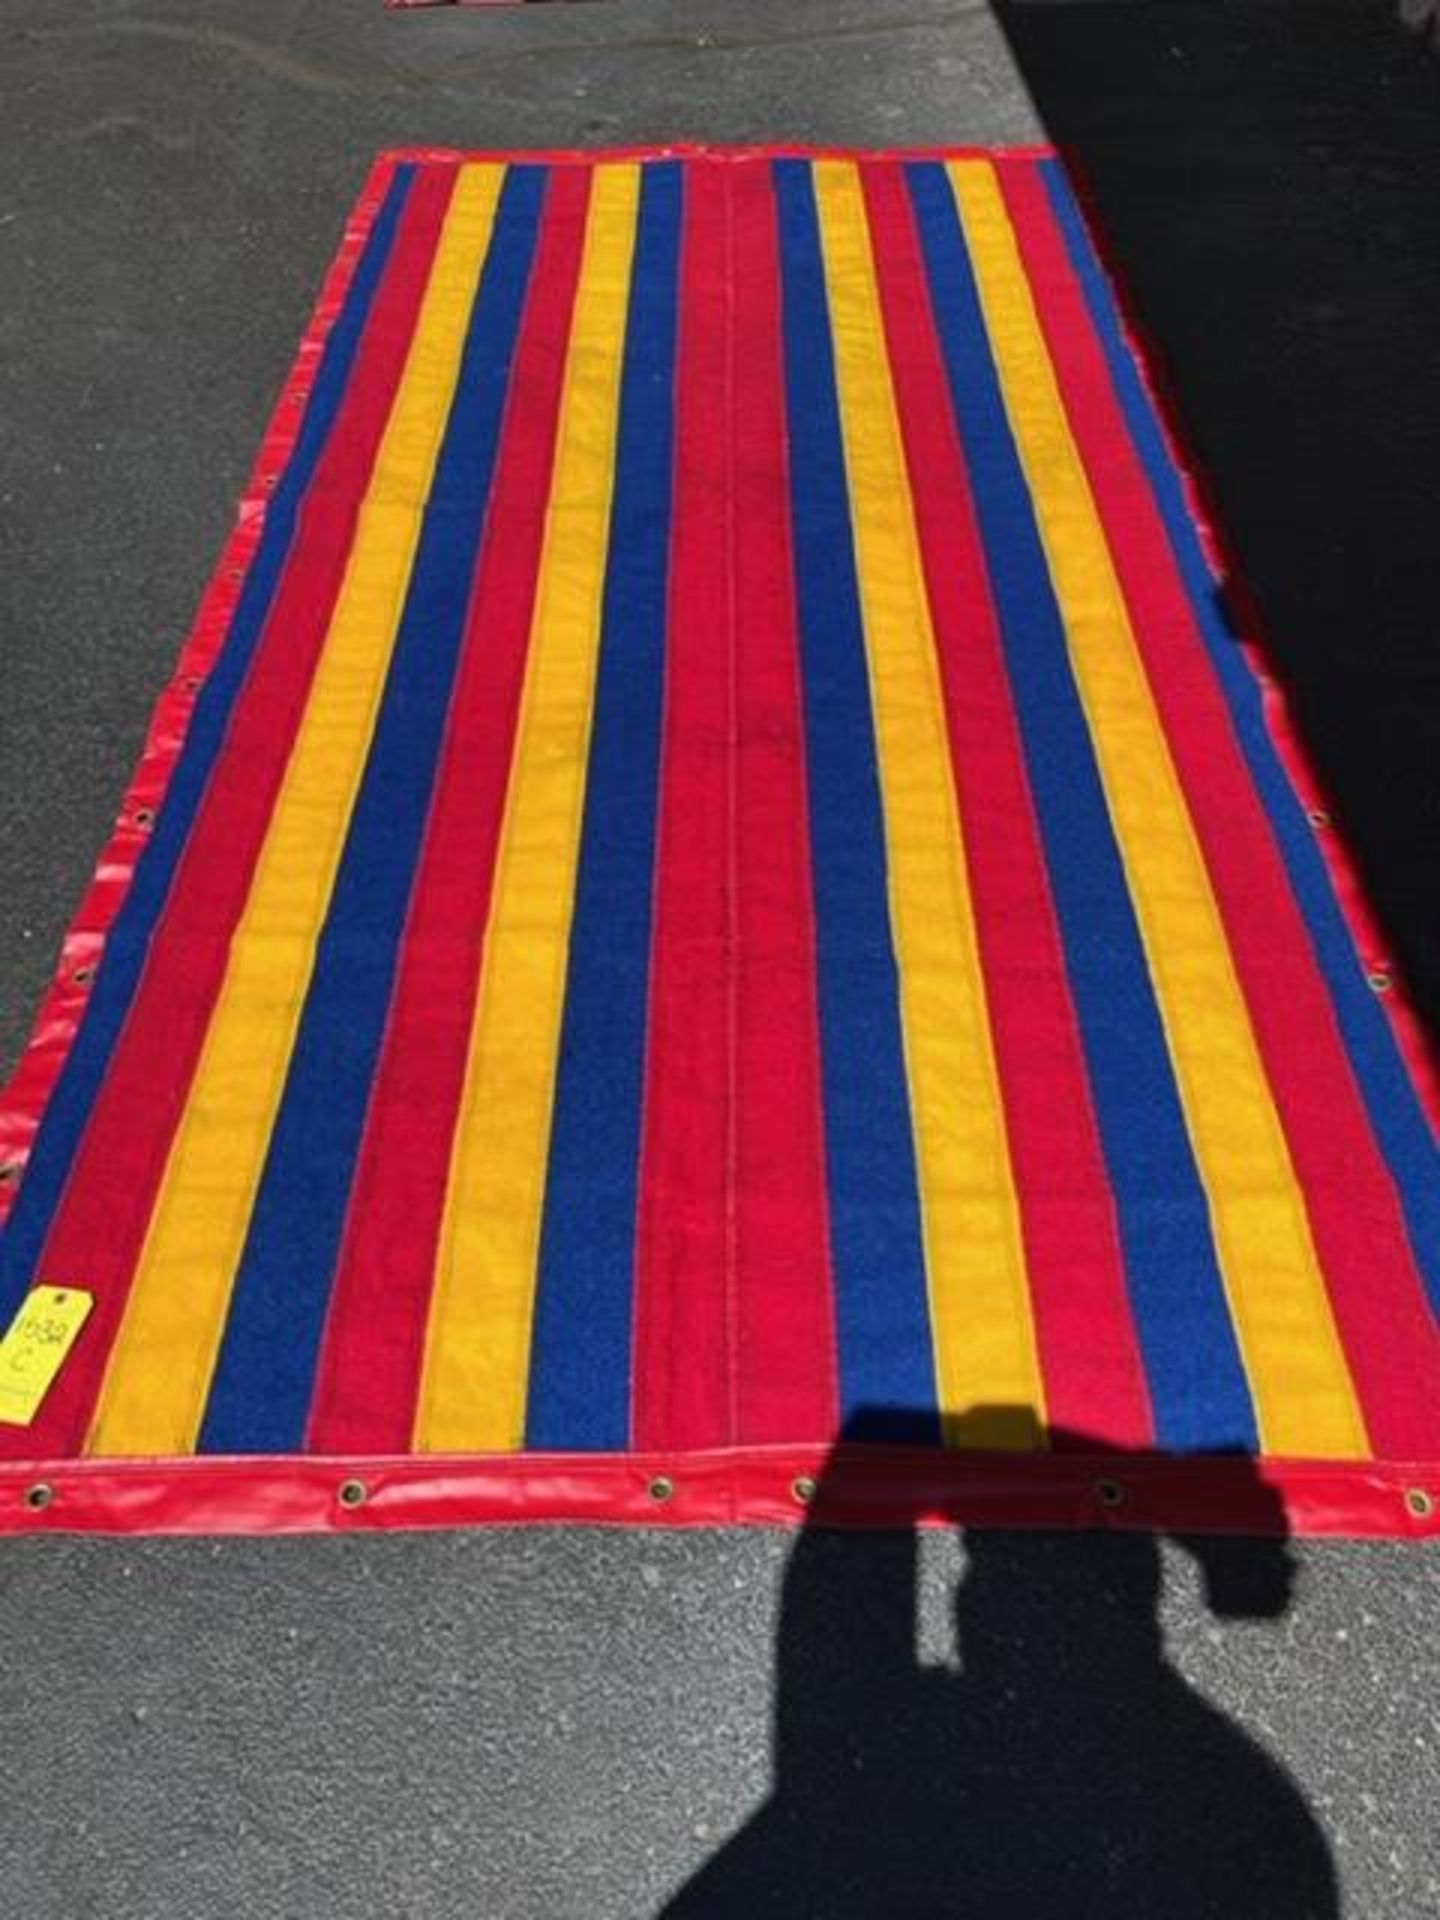 Velcro wall replacement 5 1/2 ft x 8ft